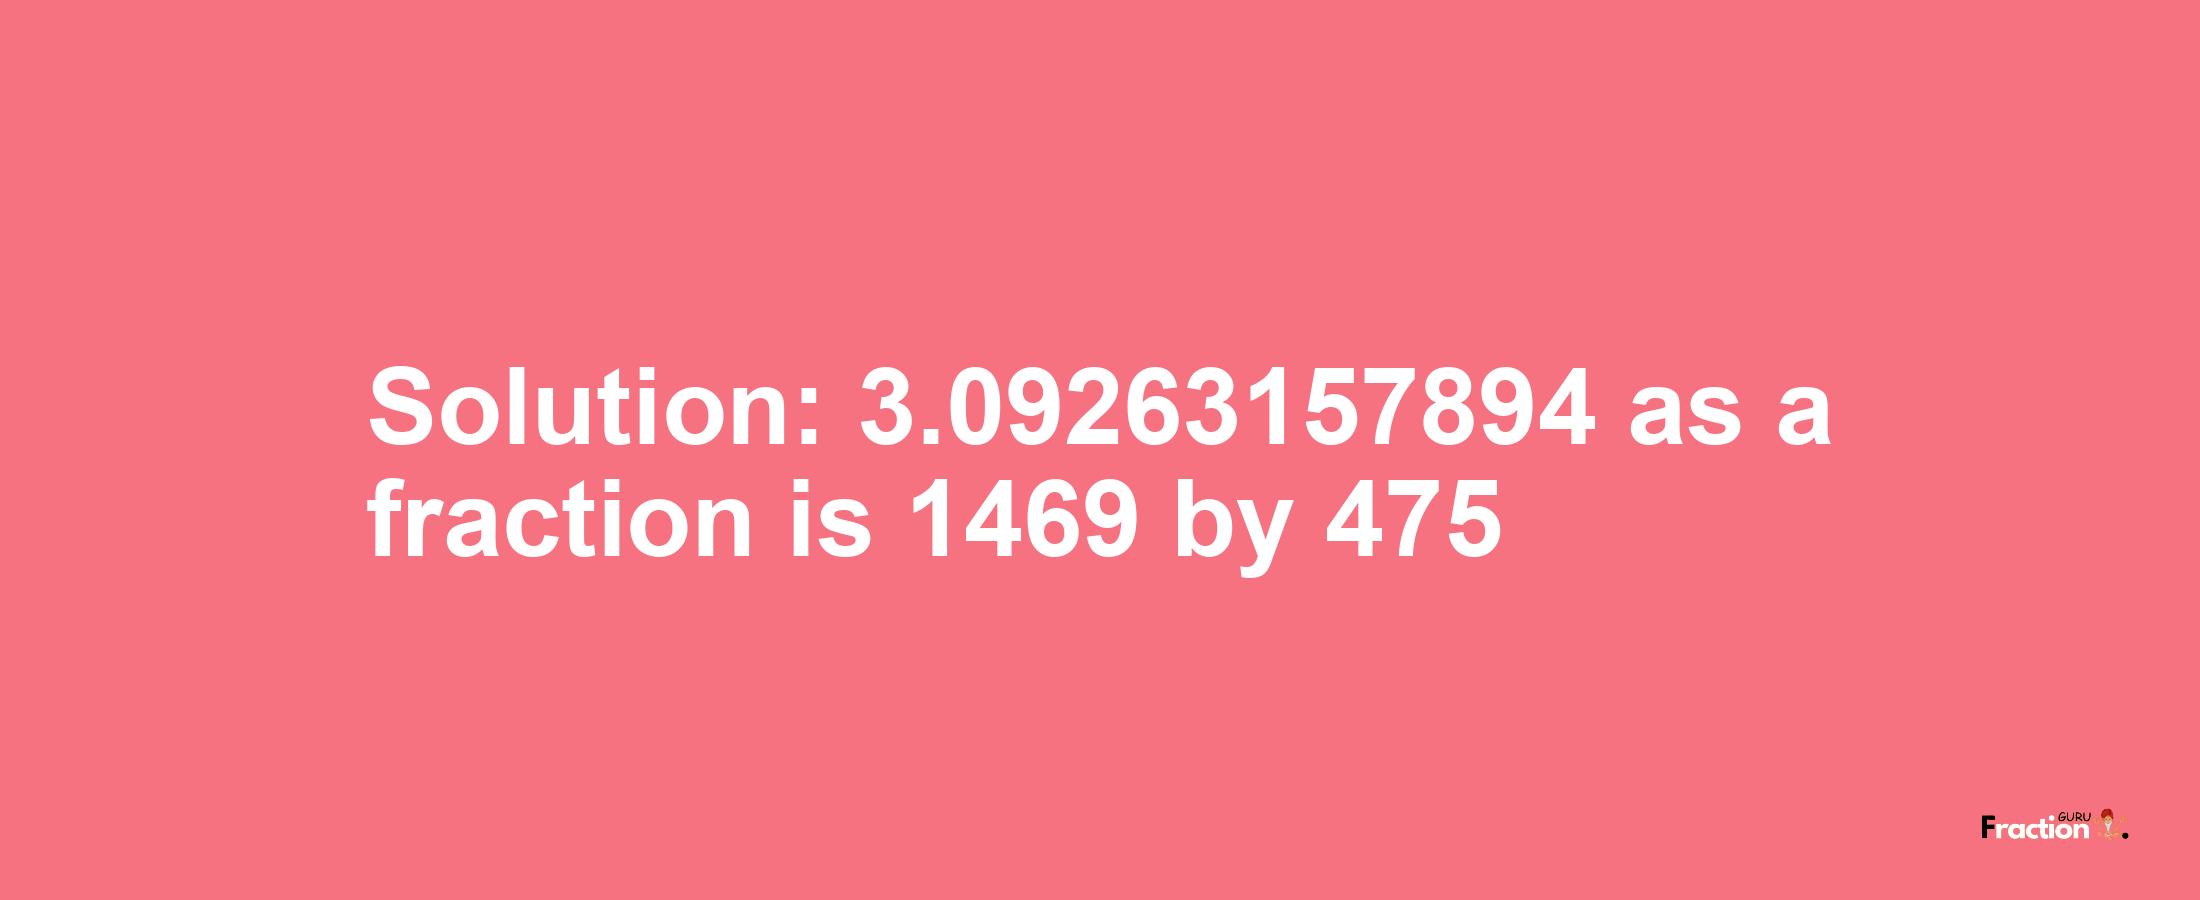 Solution:3.09263157894 as a fraction is 1469/475